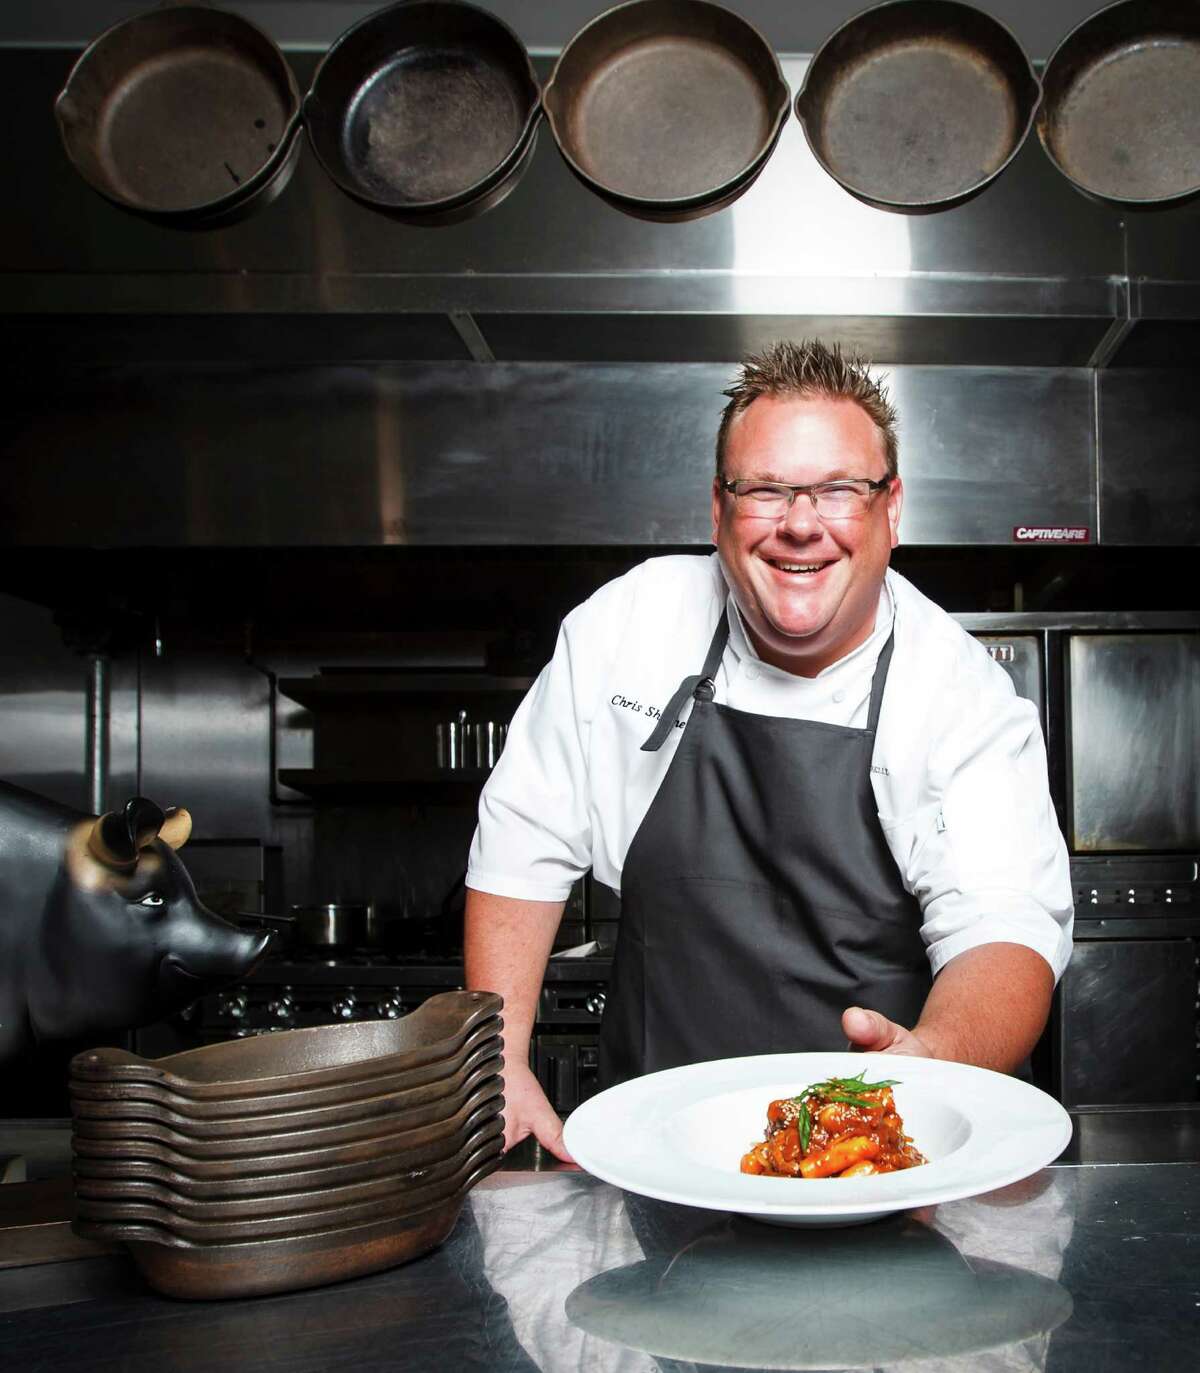 Chris Shepherd, owner and executive chef of Underbelly, poses for a portrait inside his restaurant, Friday, Sept. 21, 2012, in Houston. ( Michael Paulsen / Houston Chronicle )